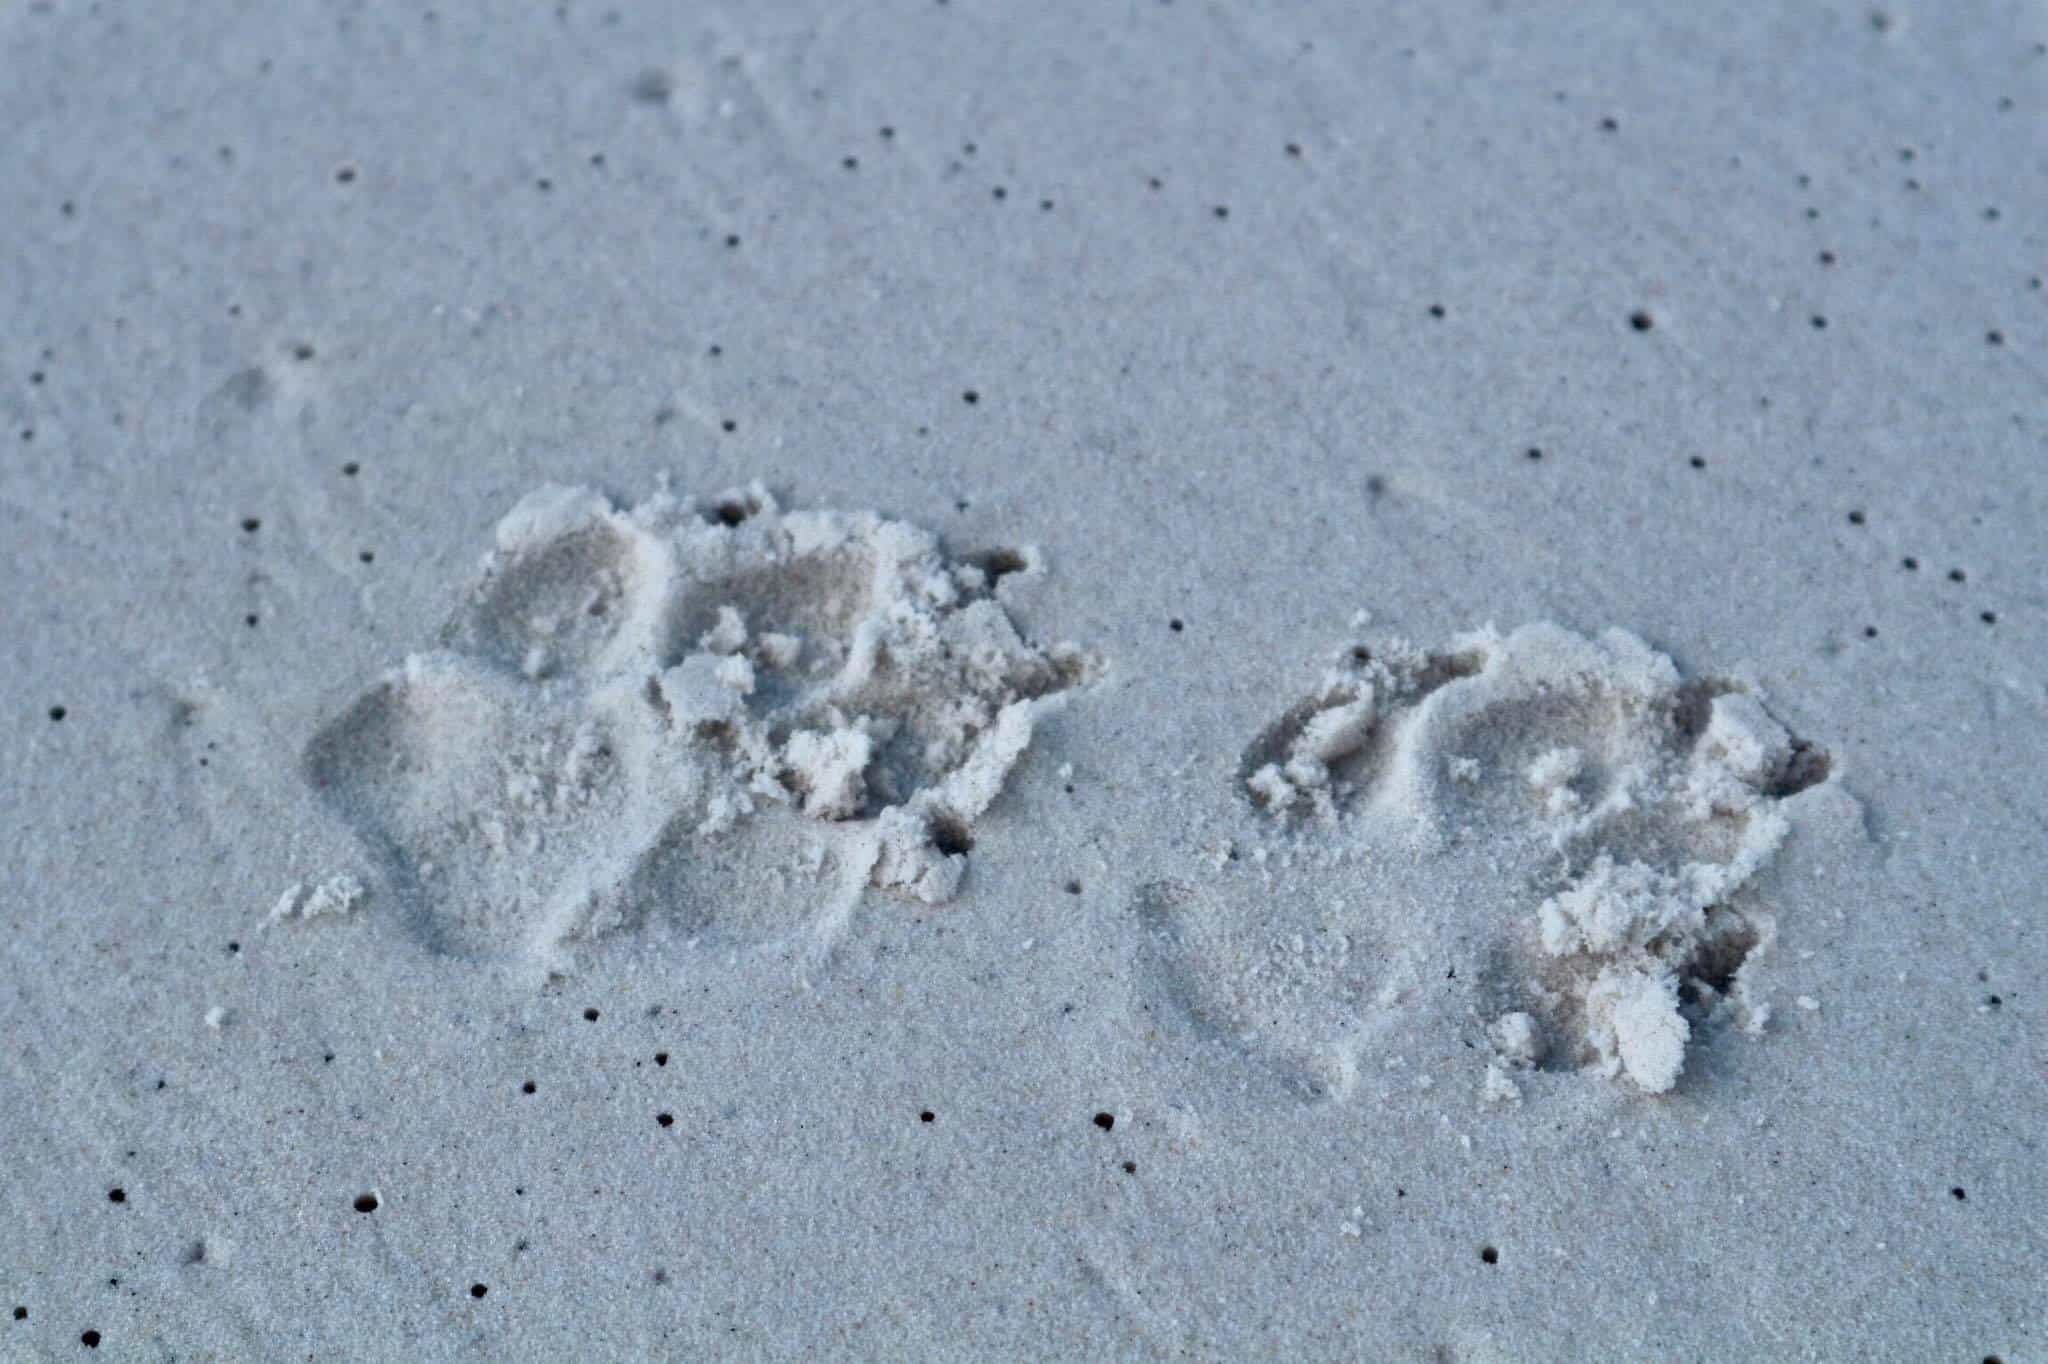 Dingo footprints in the sand